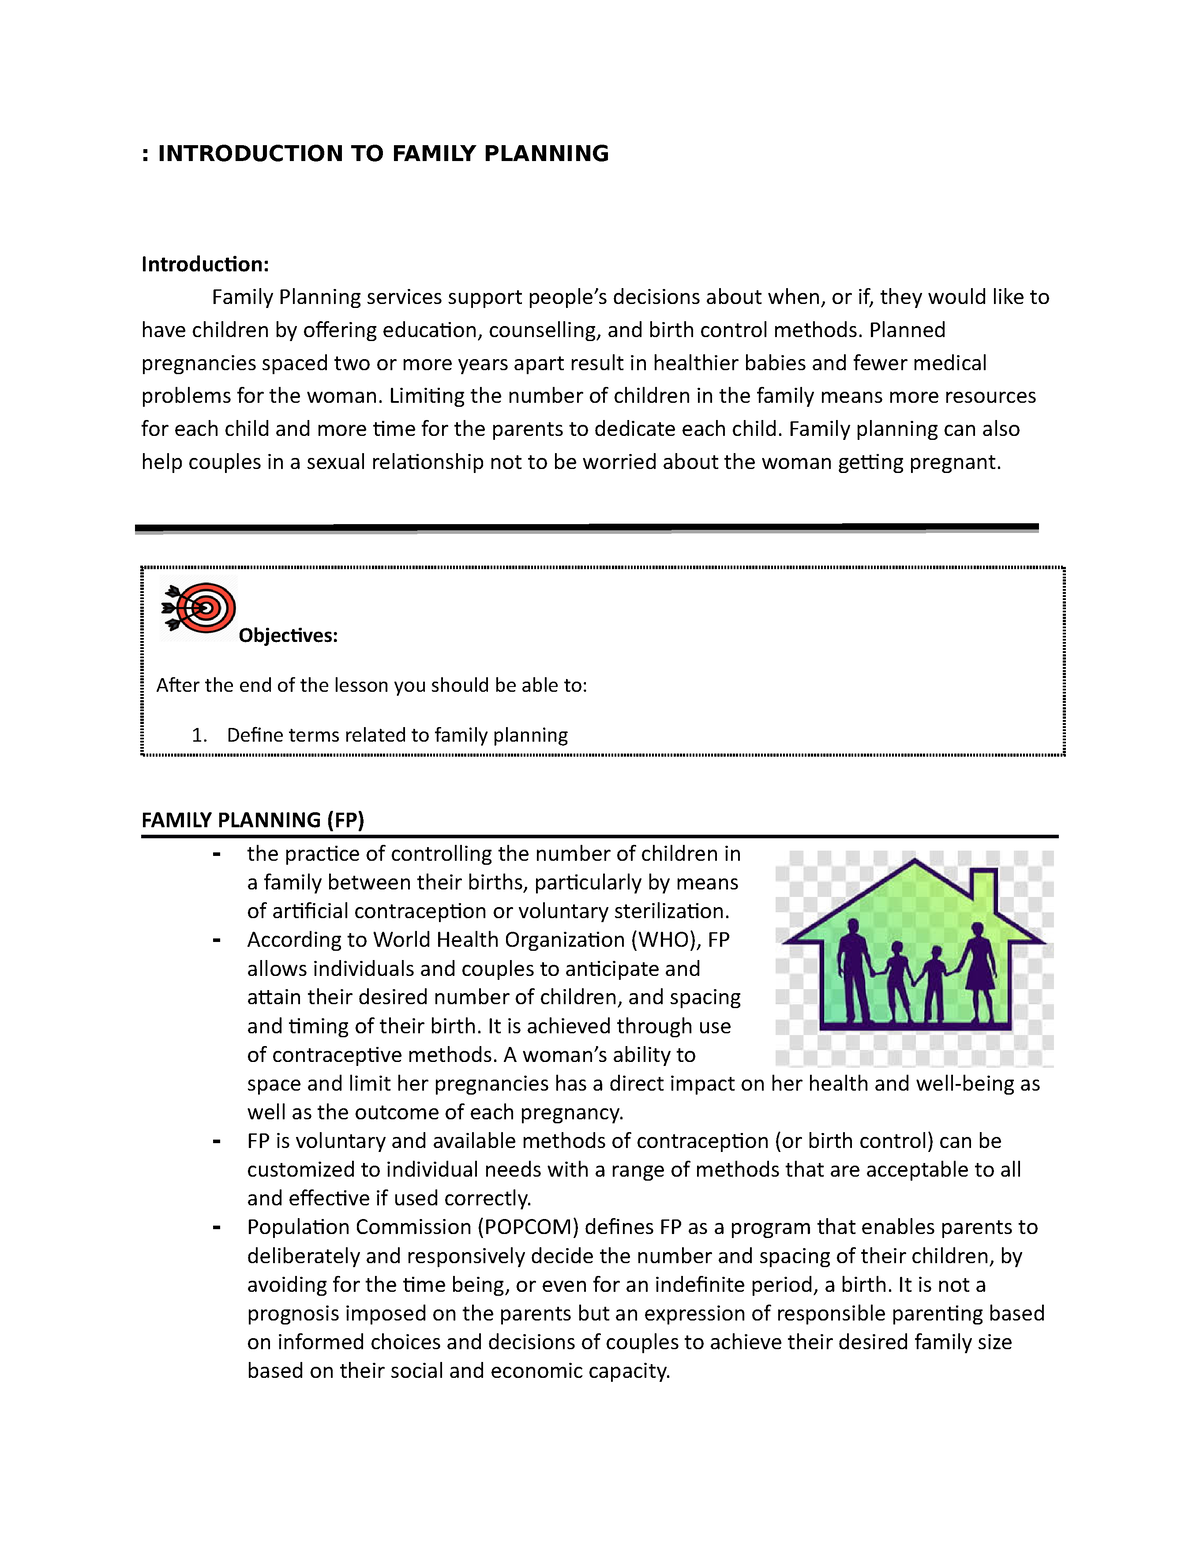 family planning introduction essay